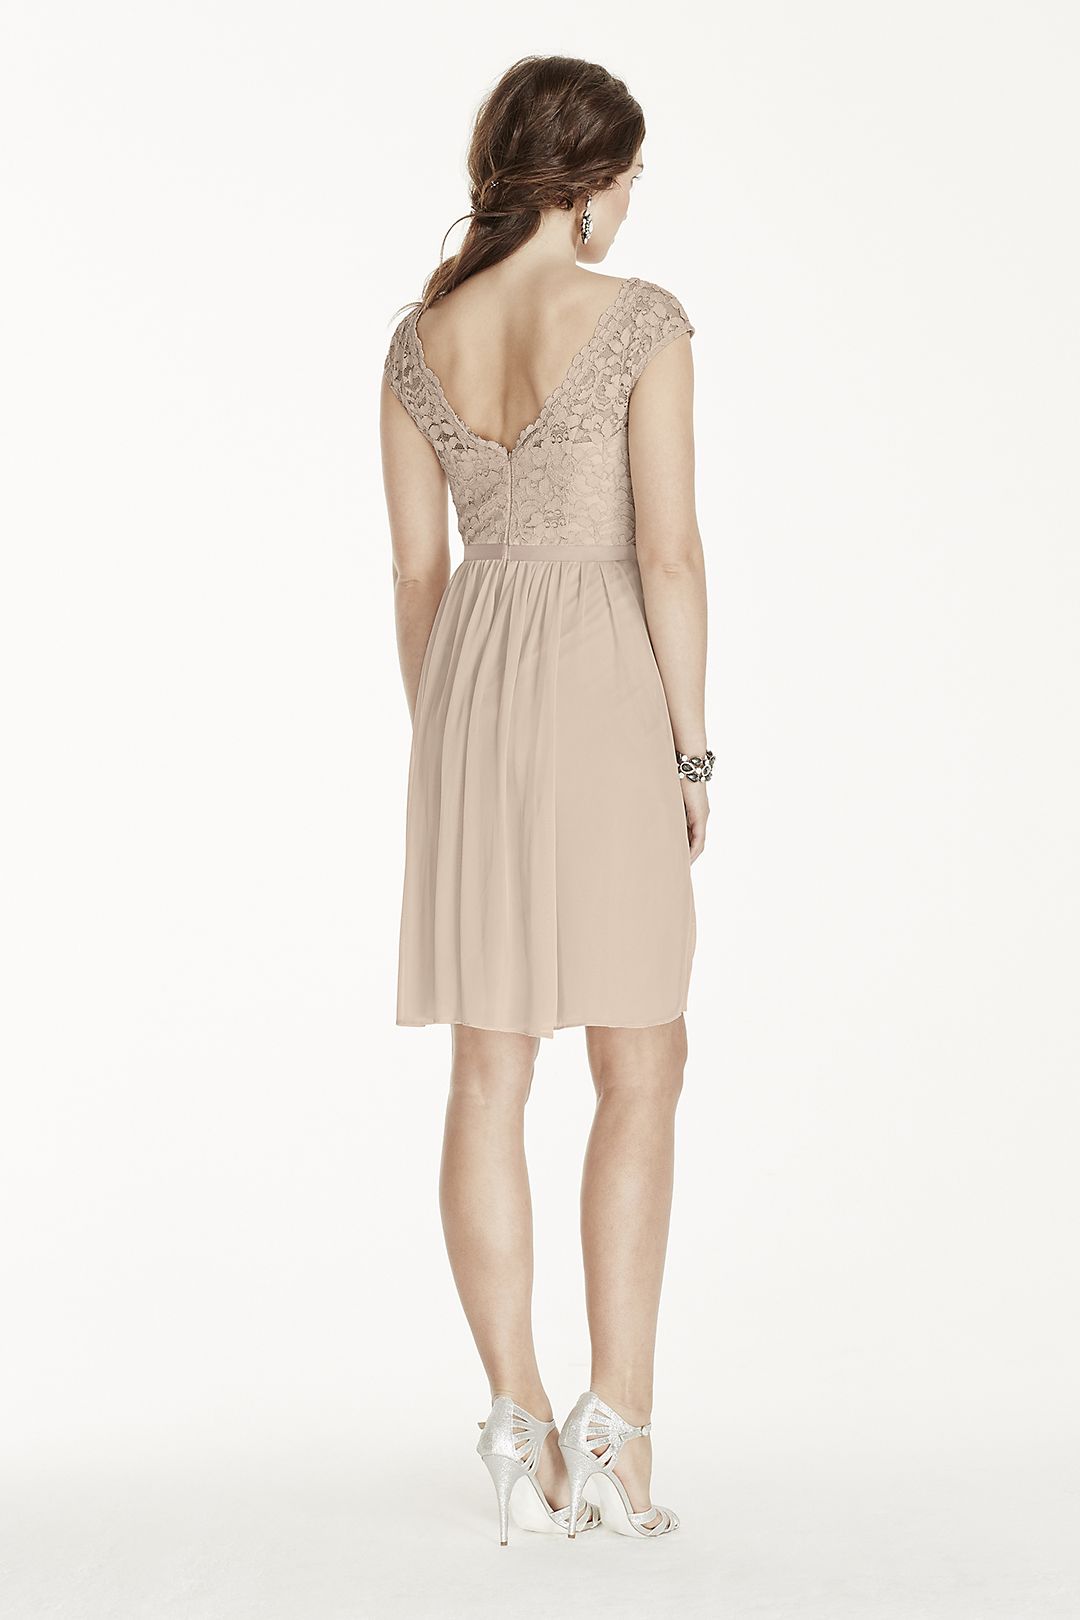 Short Lace and Mesh Dress with Illusion Neckline Image 2